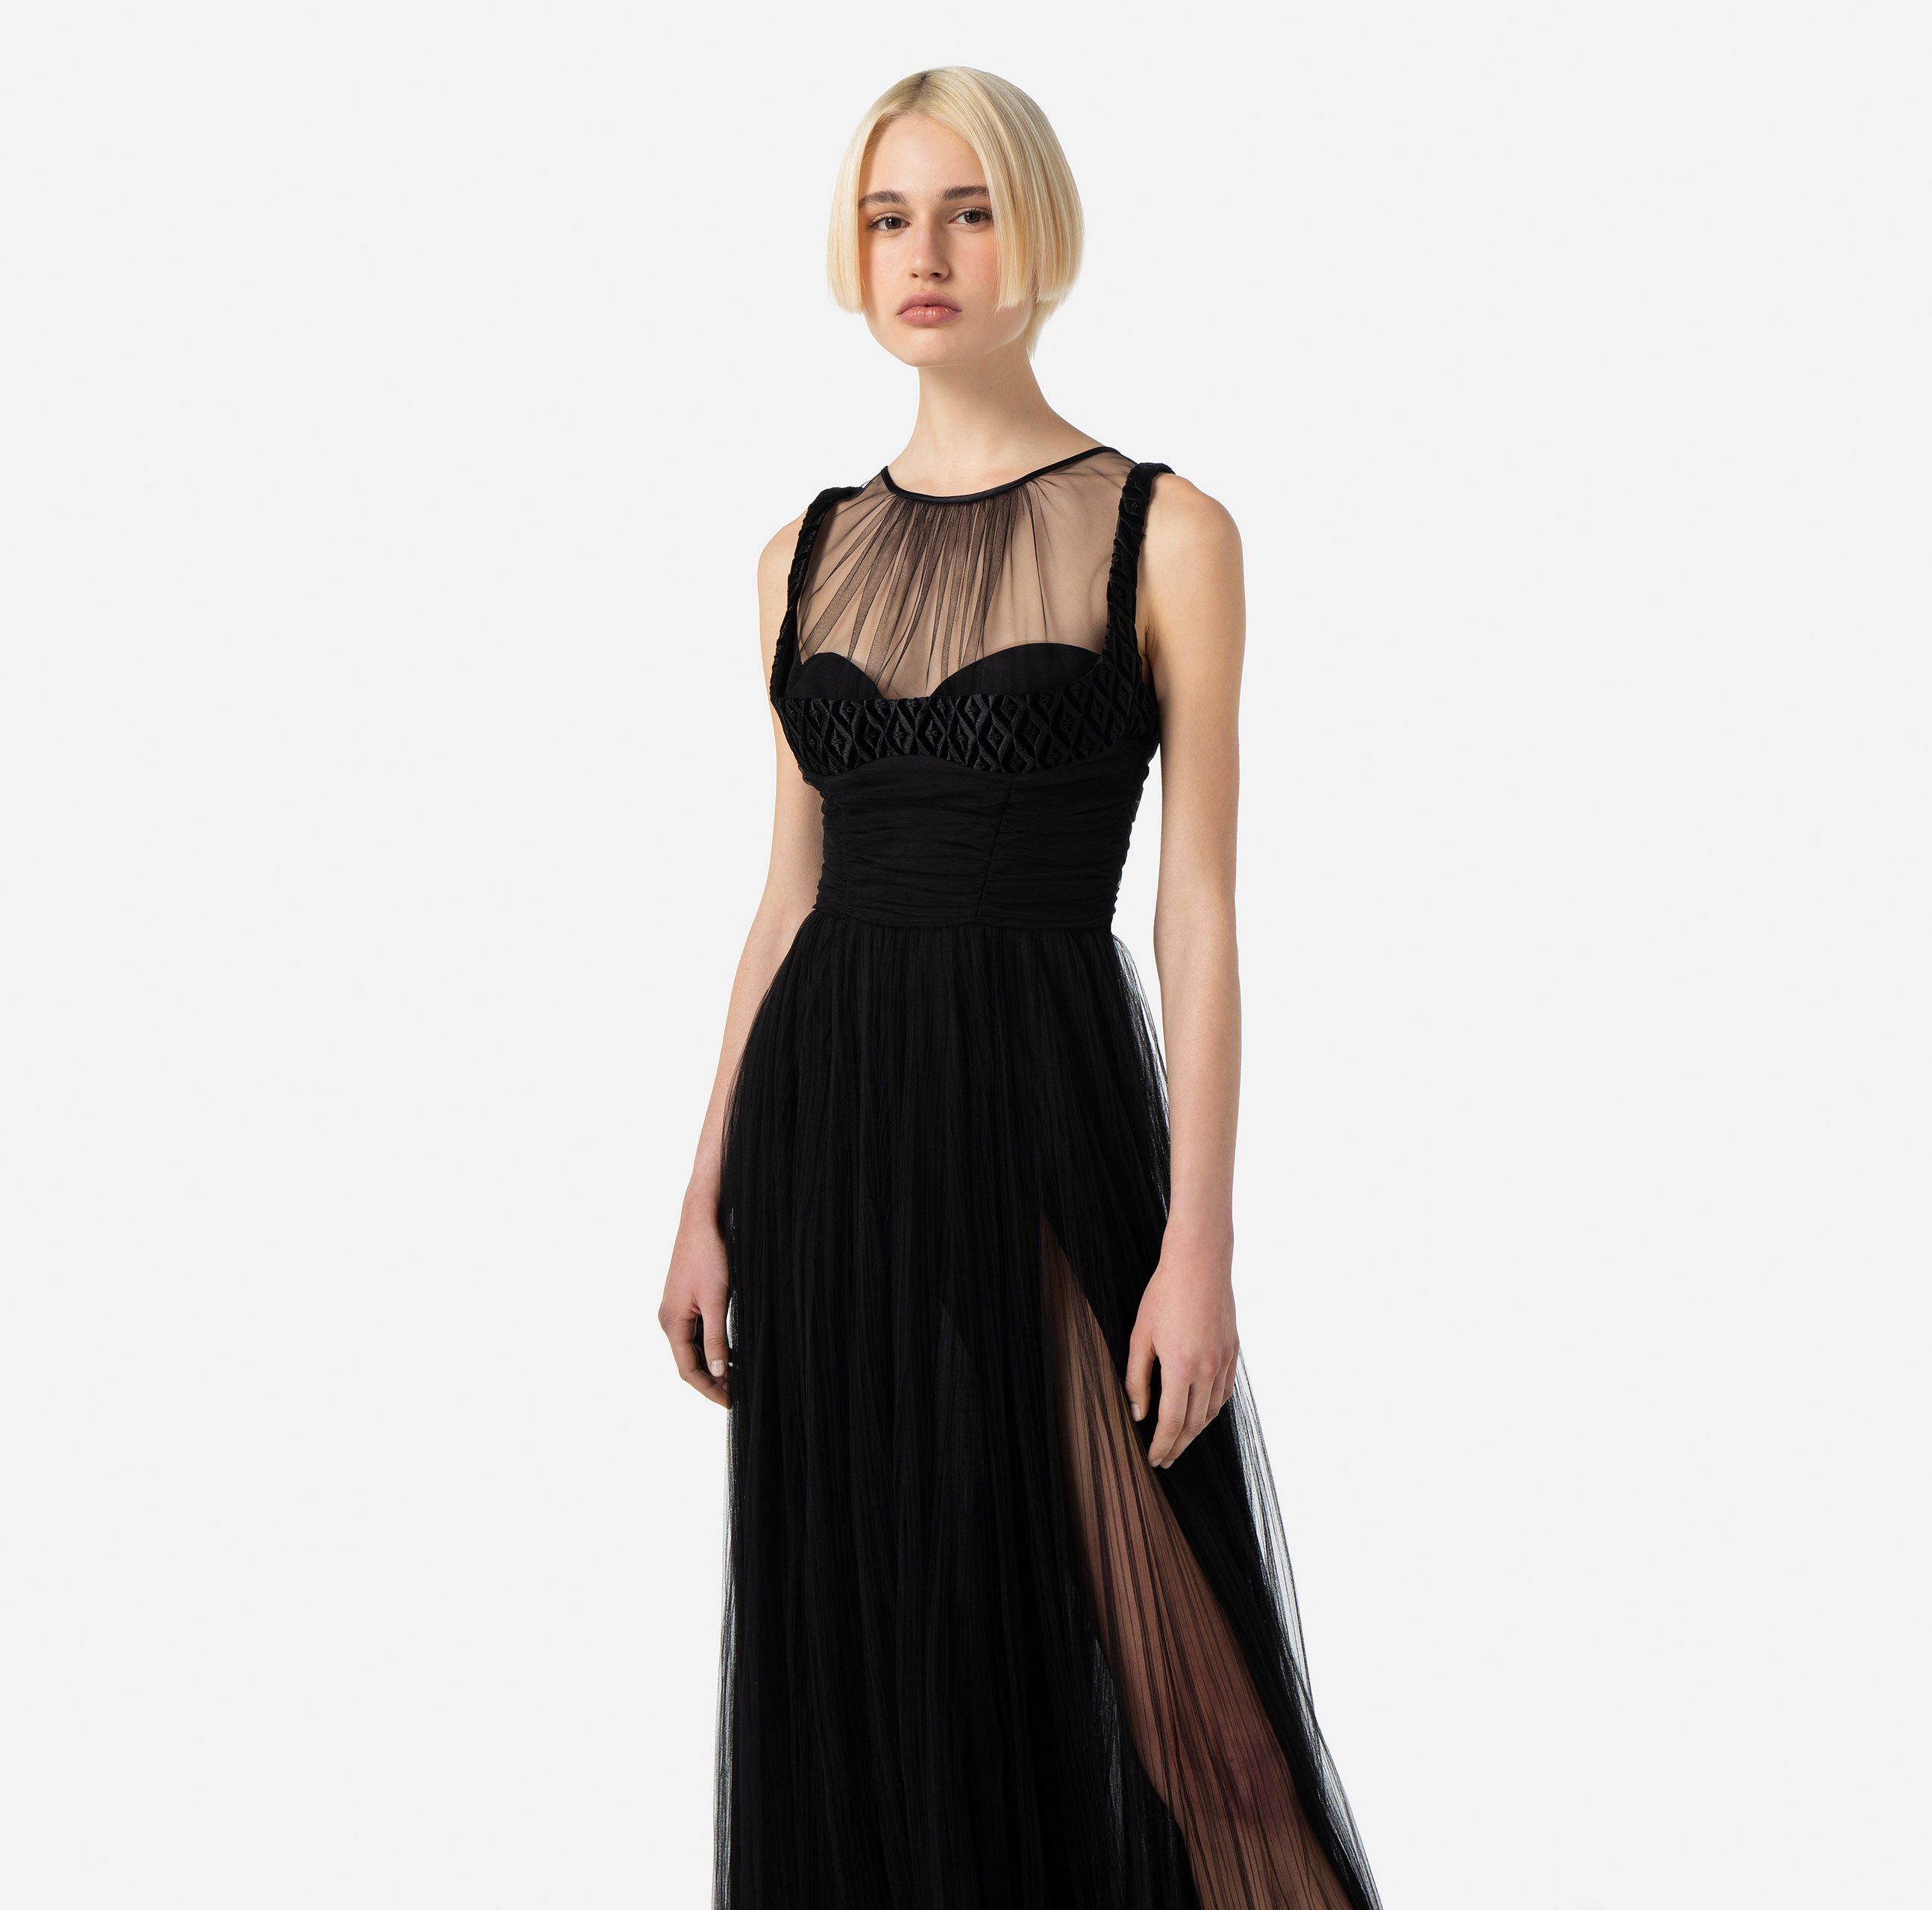 Red Carpet dress in pleated tulle fabric - Elisabetta Franchi